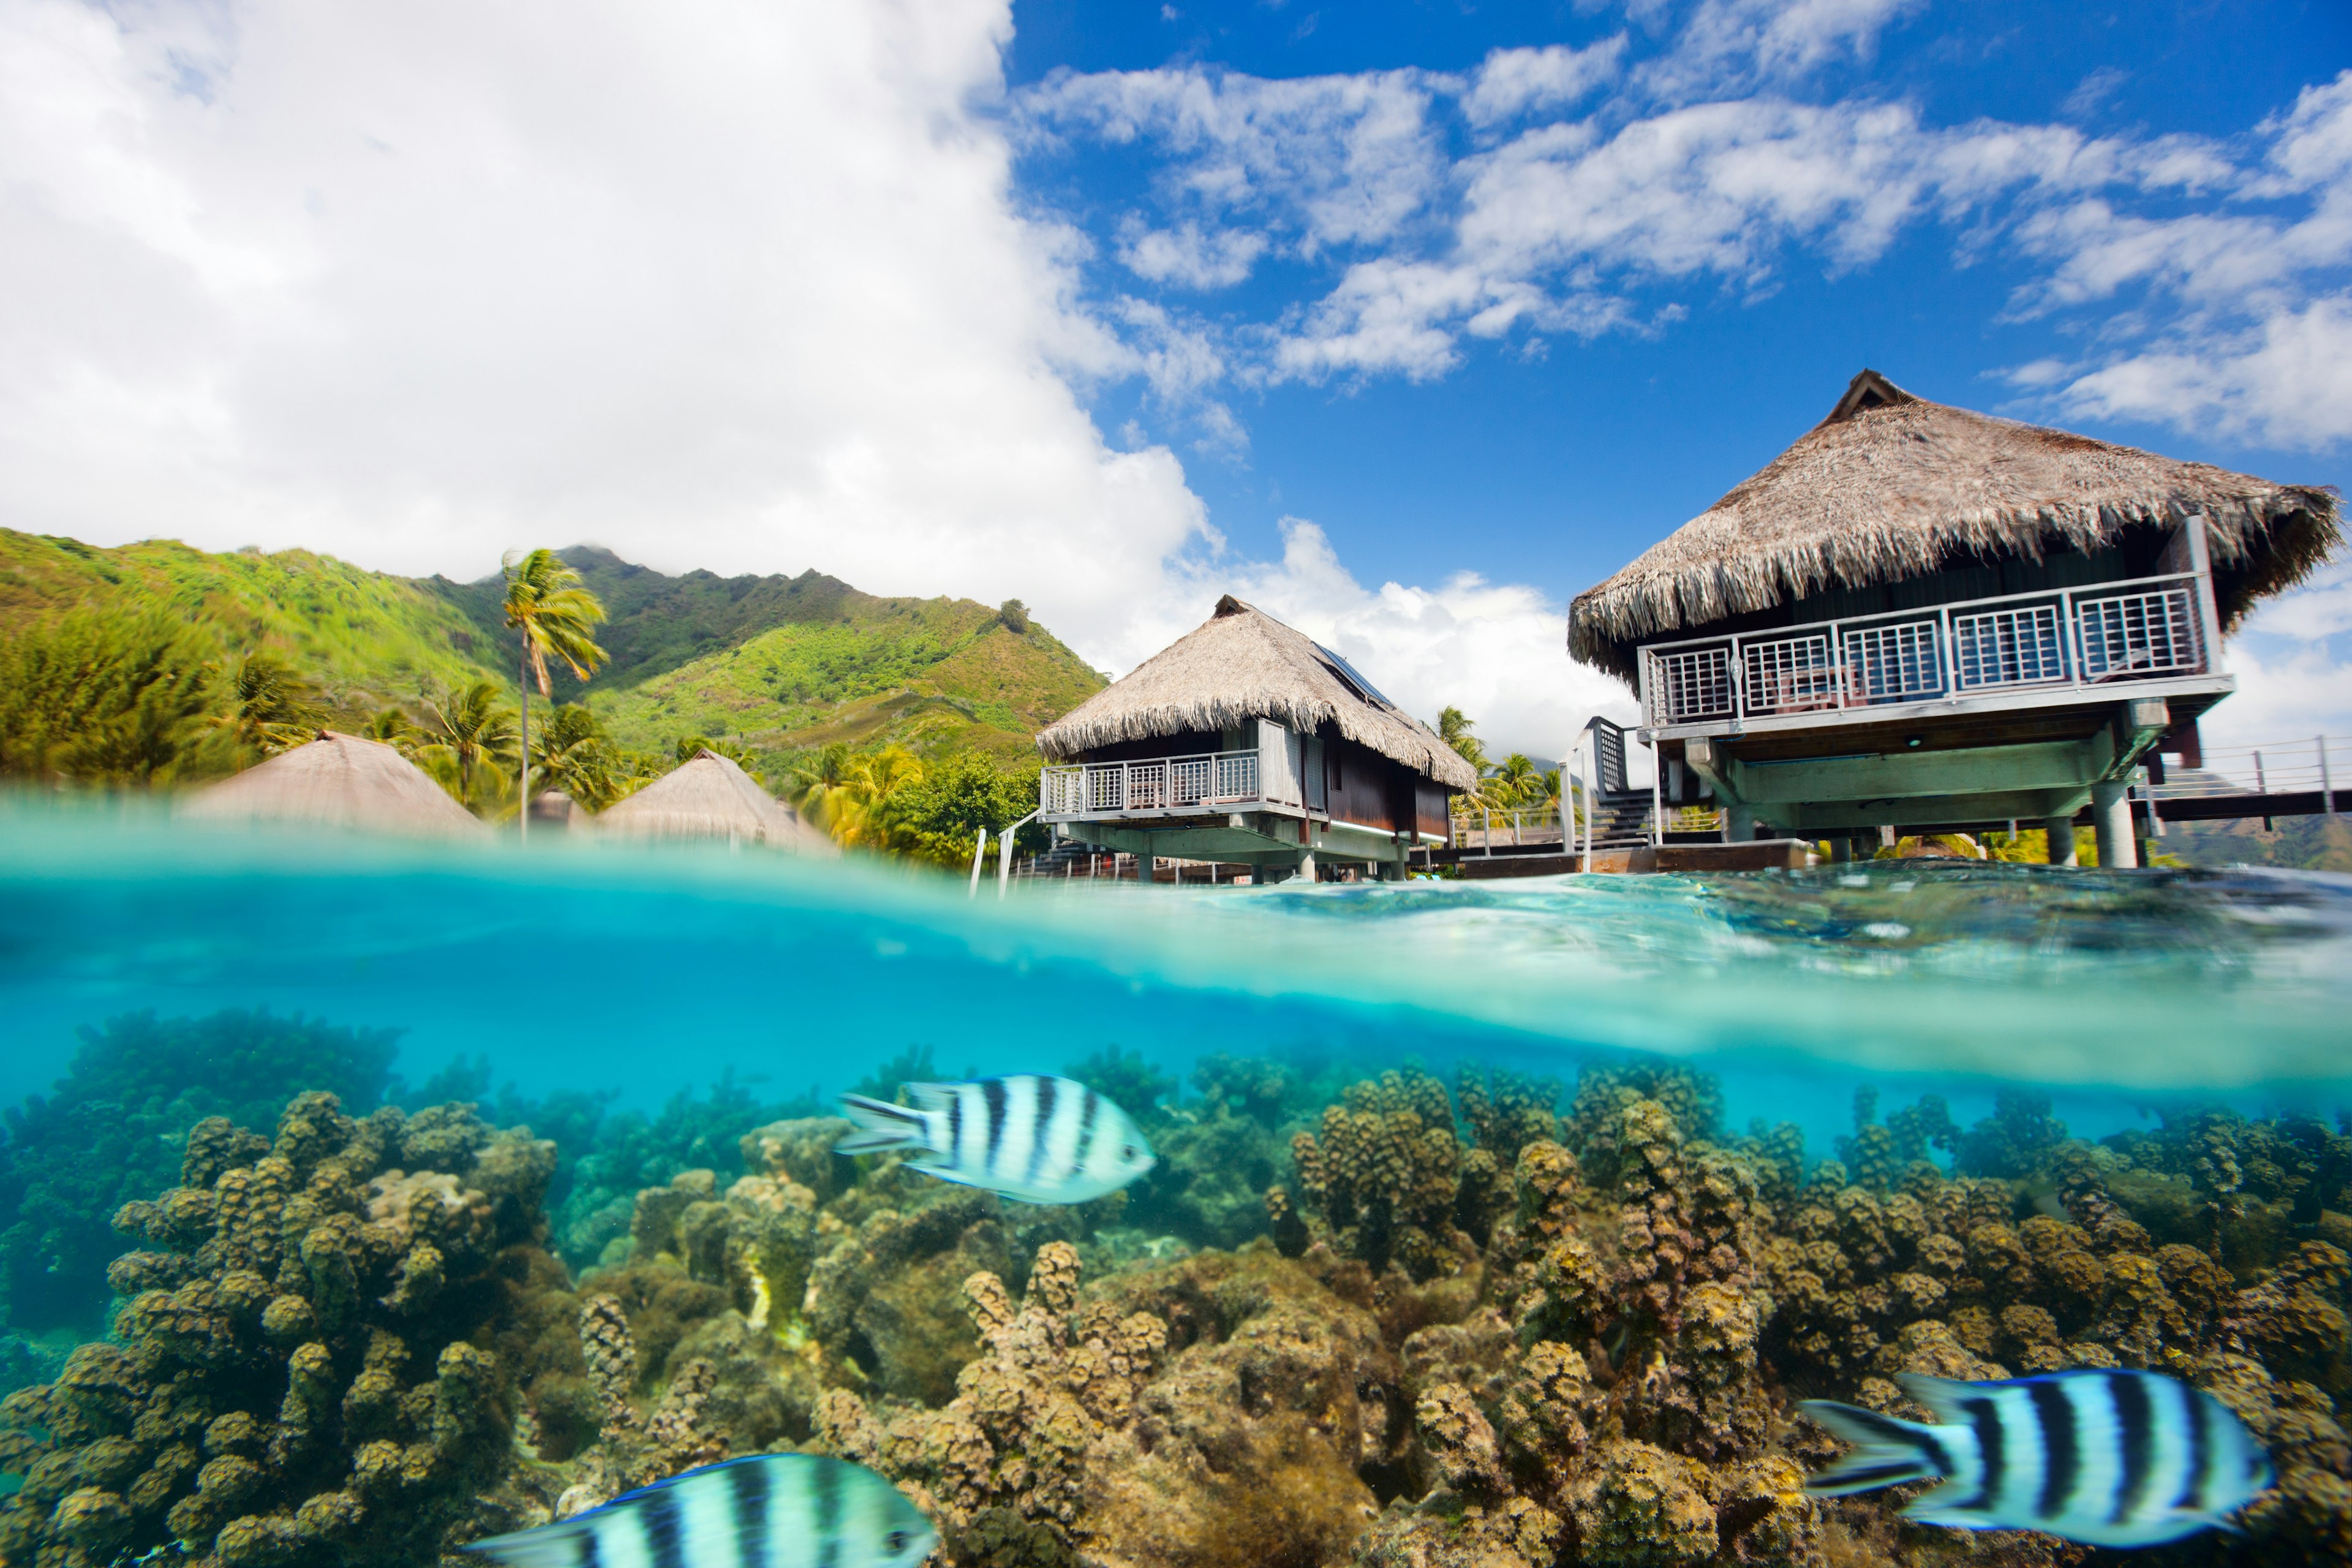 Beautiful above and underwater landscape of Moorea island in French Polynesia